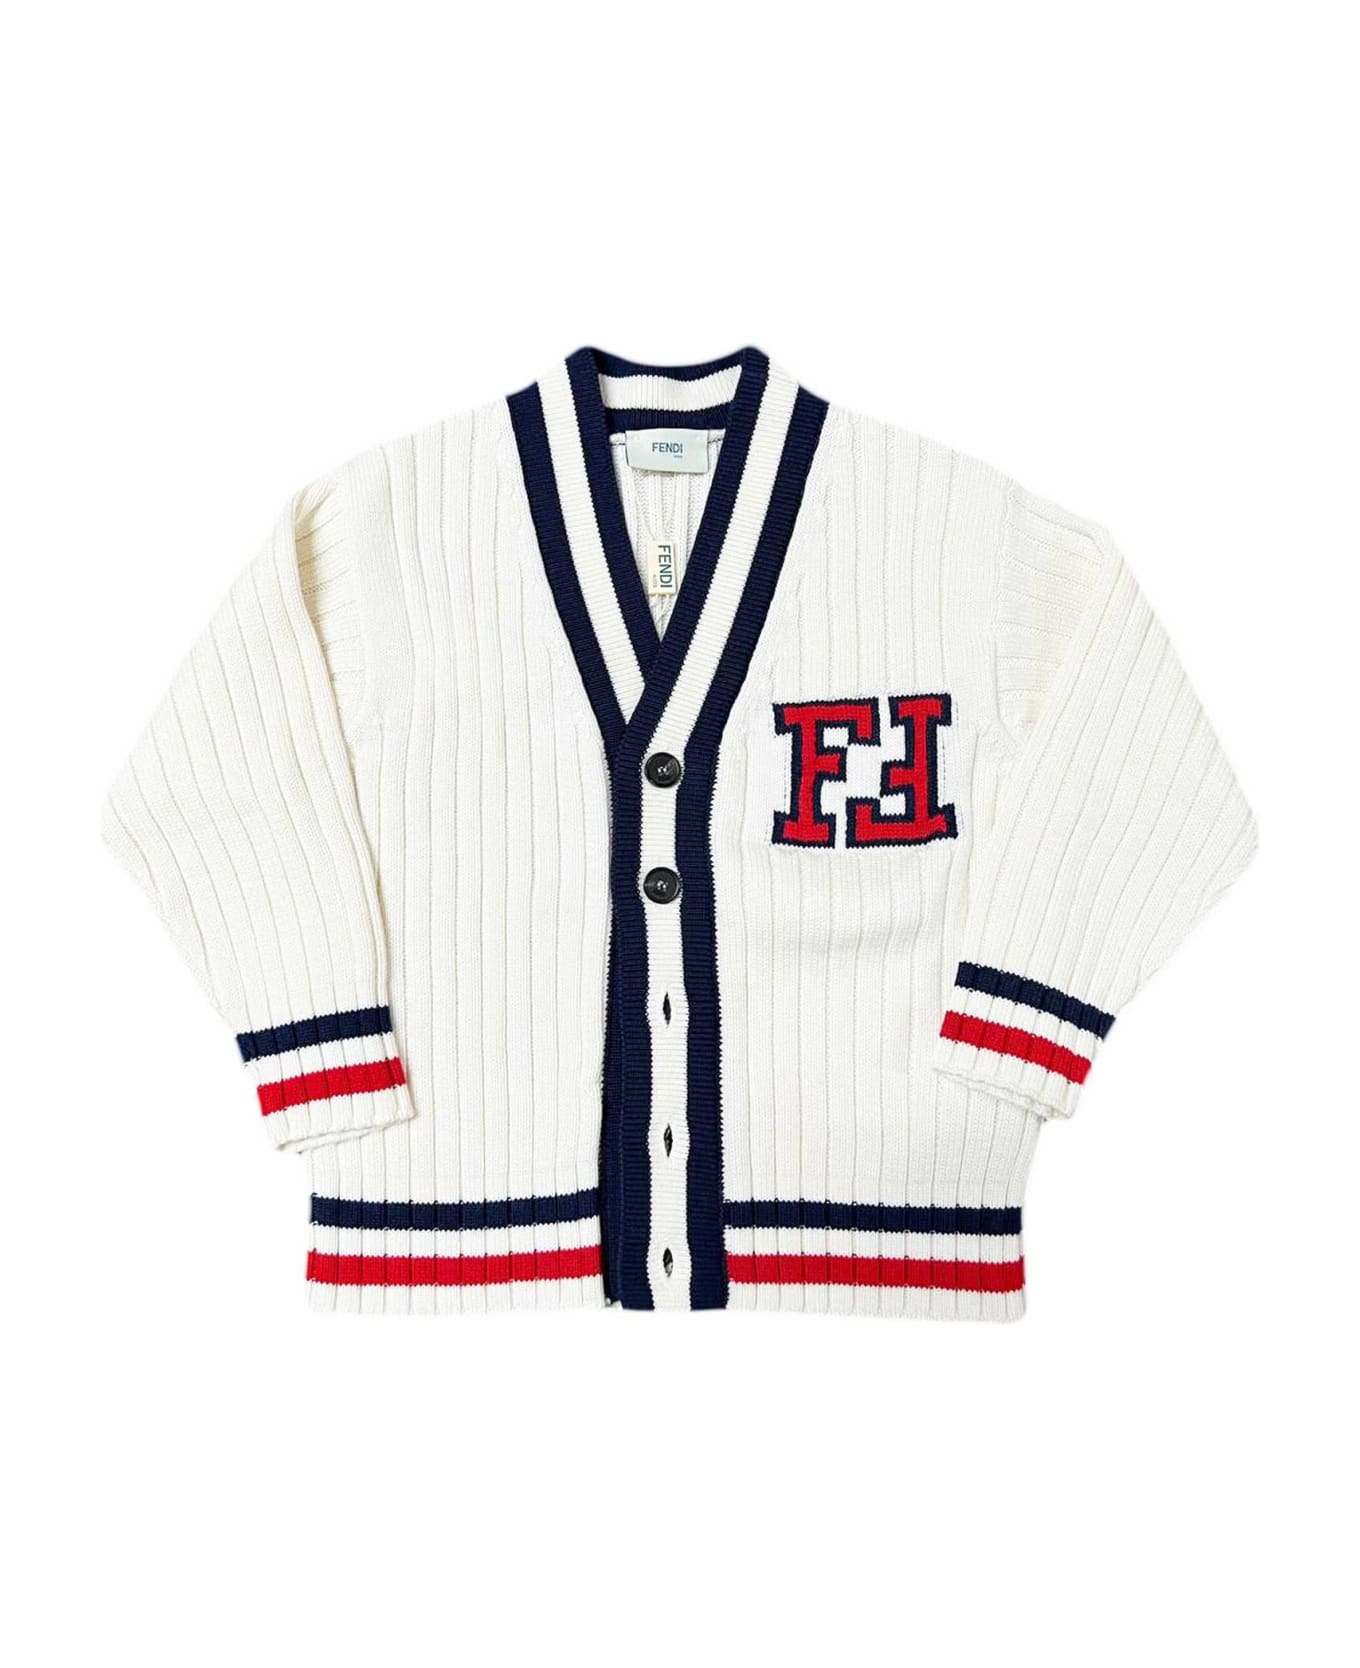 Fendi White Cardigan With Colored Details - Gesso